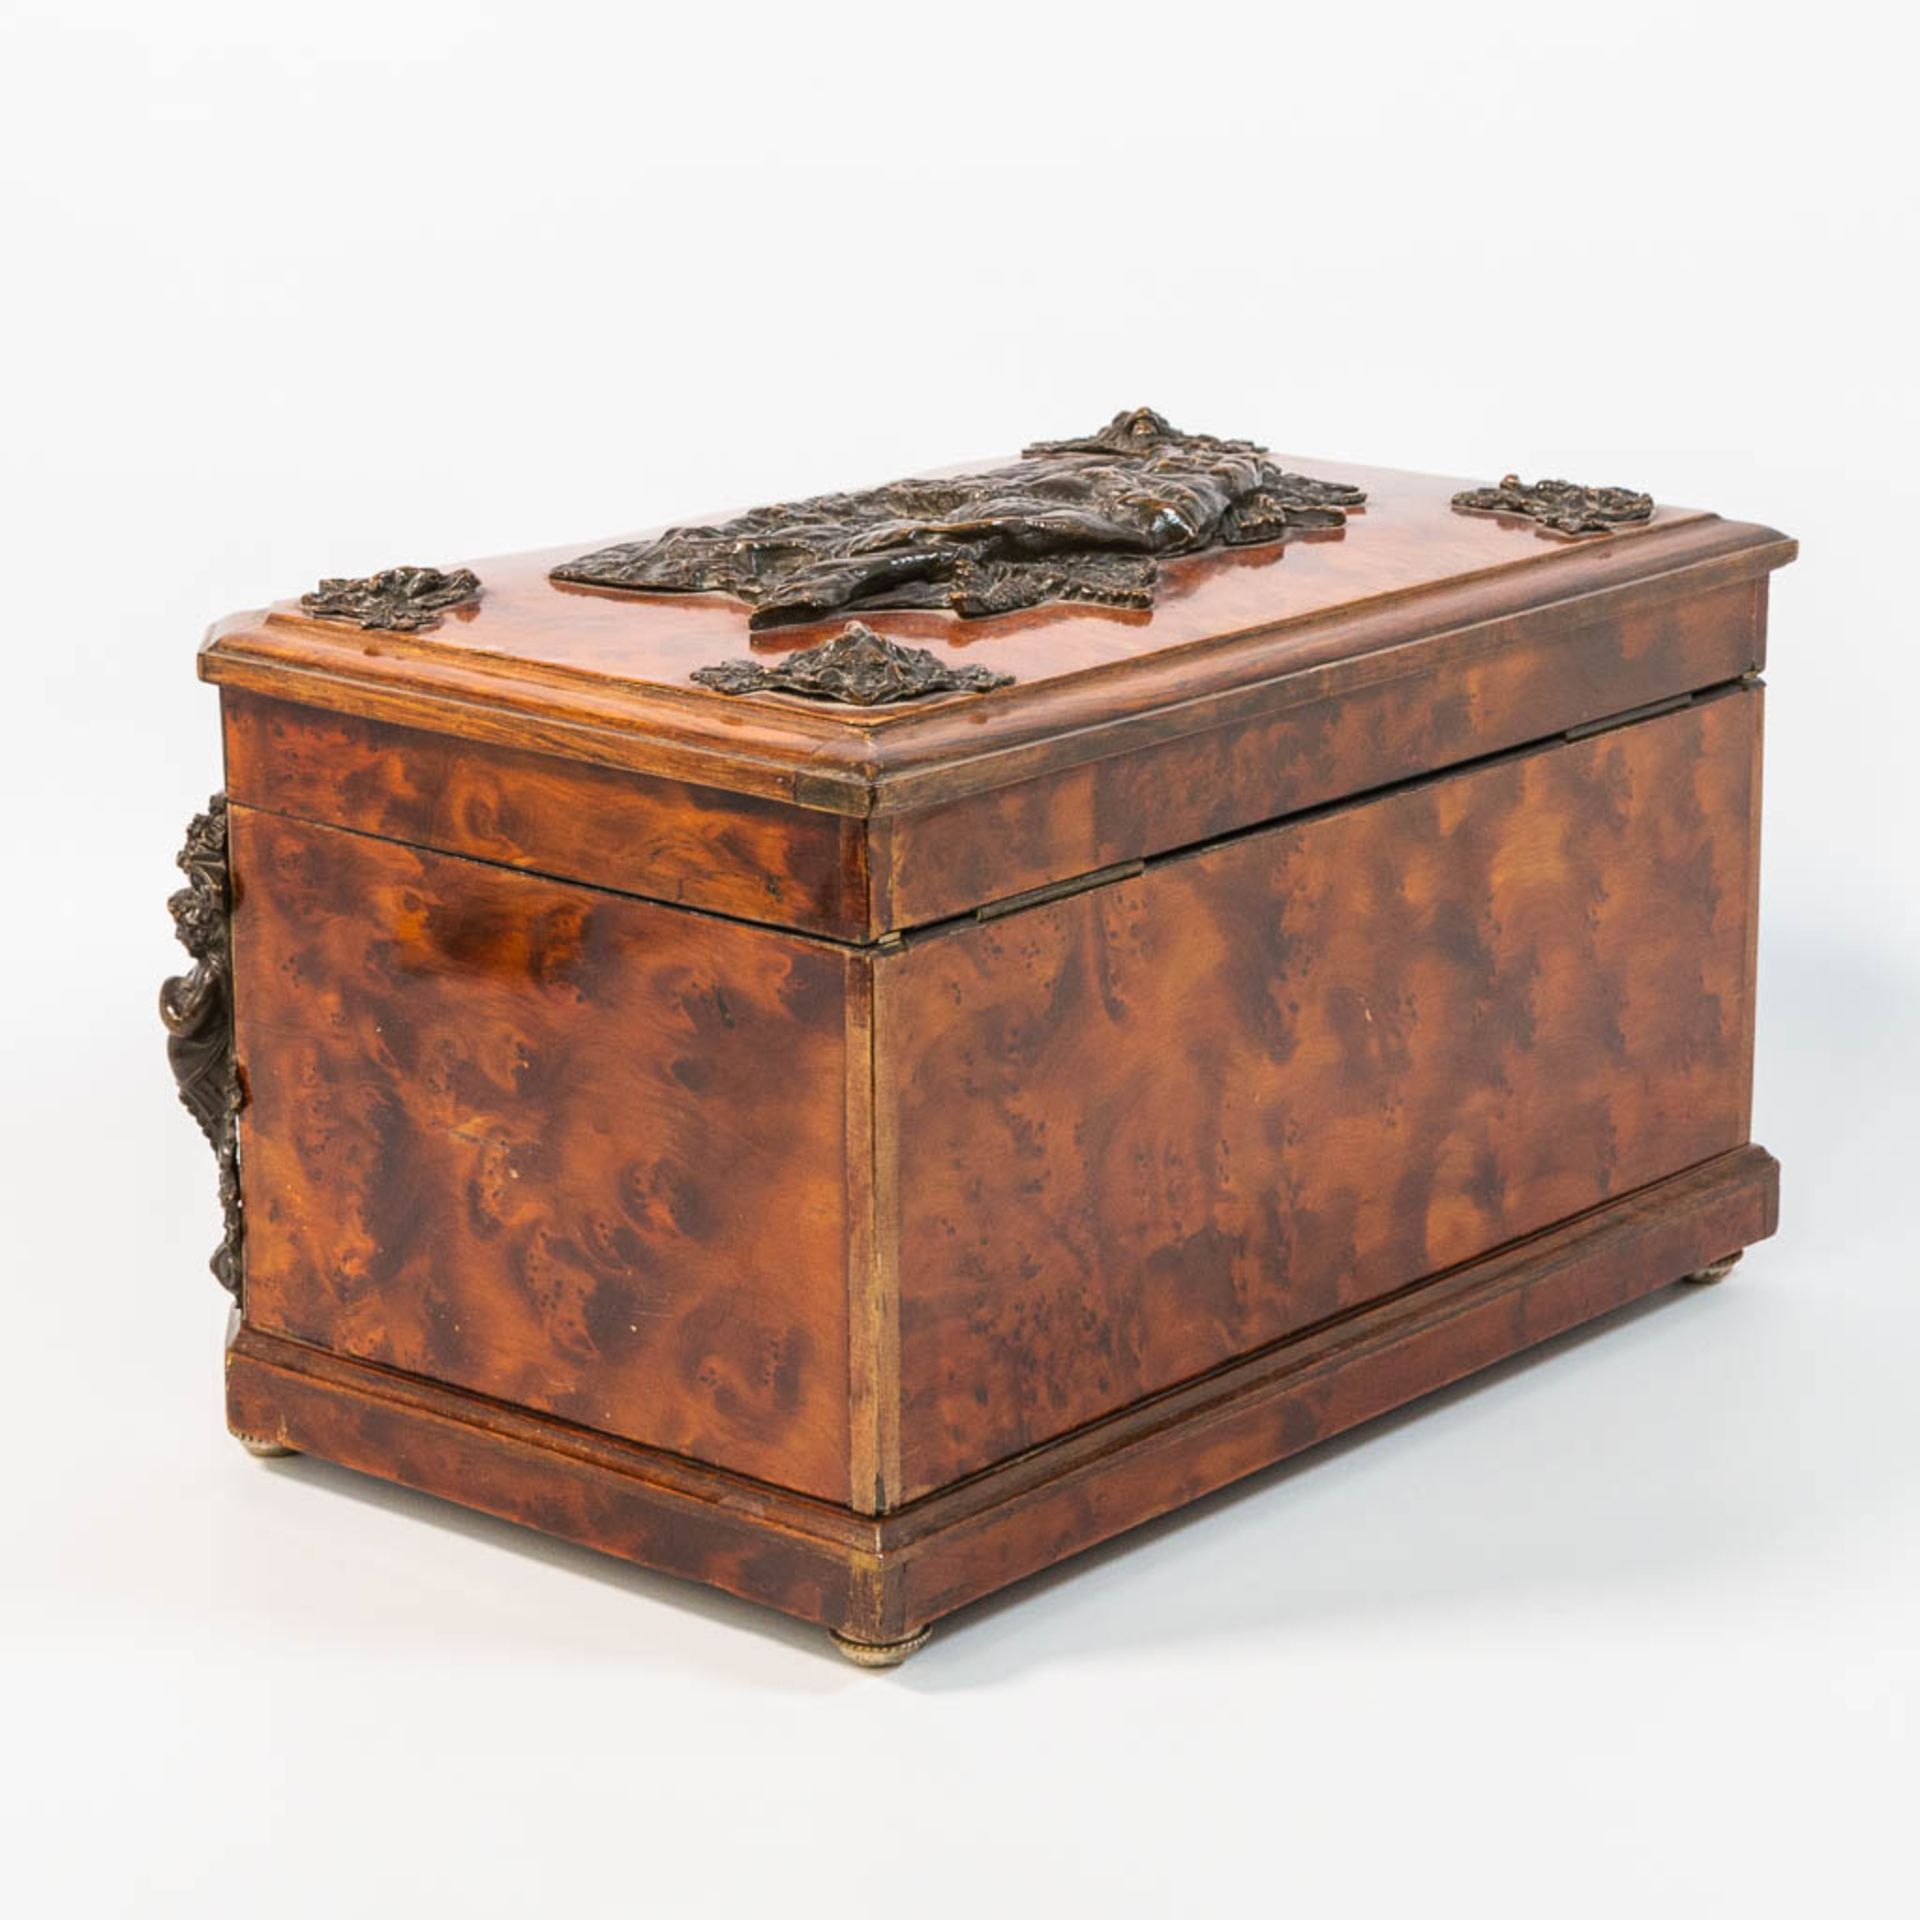 An antique Jewellry box, made of root wood and mounted with bonze hunting scenes, 19th century. - Bild 6 aus 20